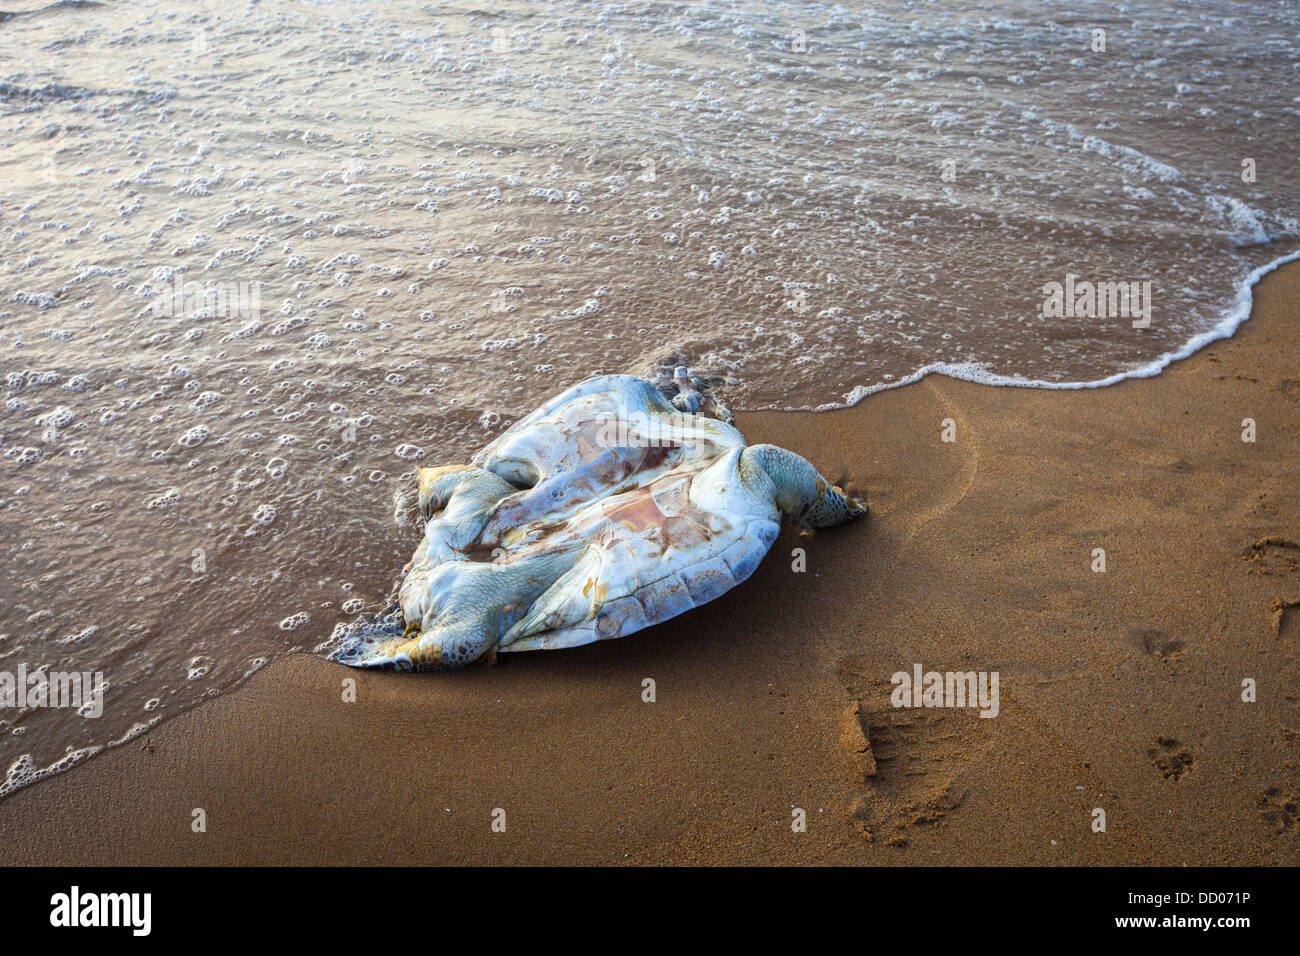 A dead turtle on the Indian Ocean Stock Photo